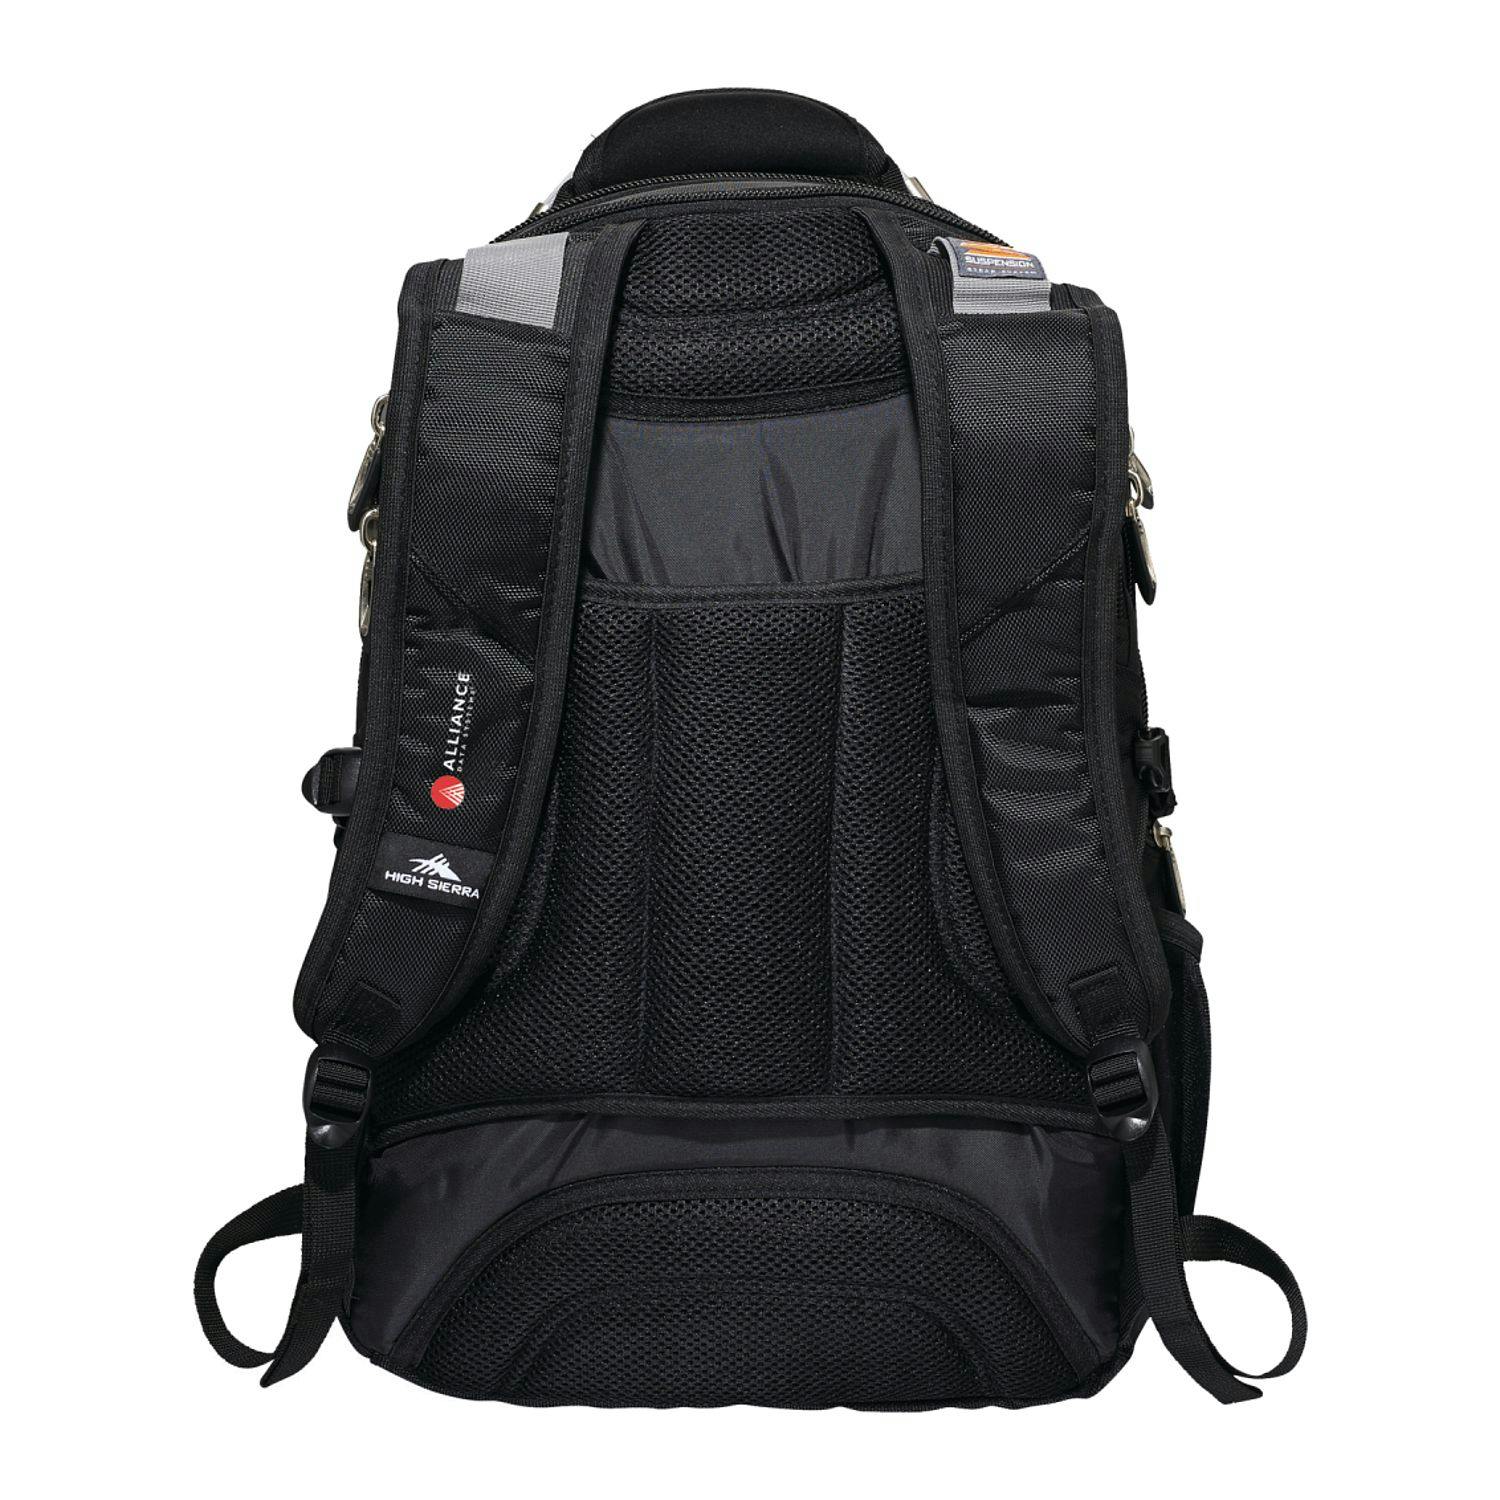 High Sierra Elite Fly-By 17" Computer Backpack - additional Image 3